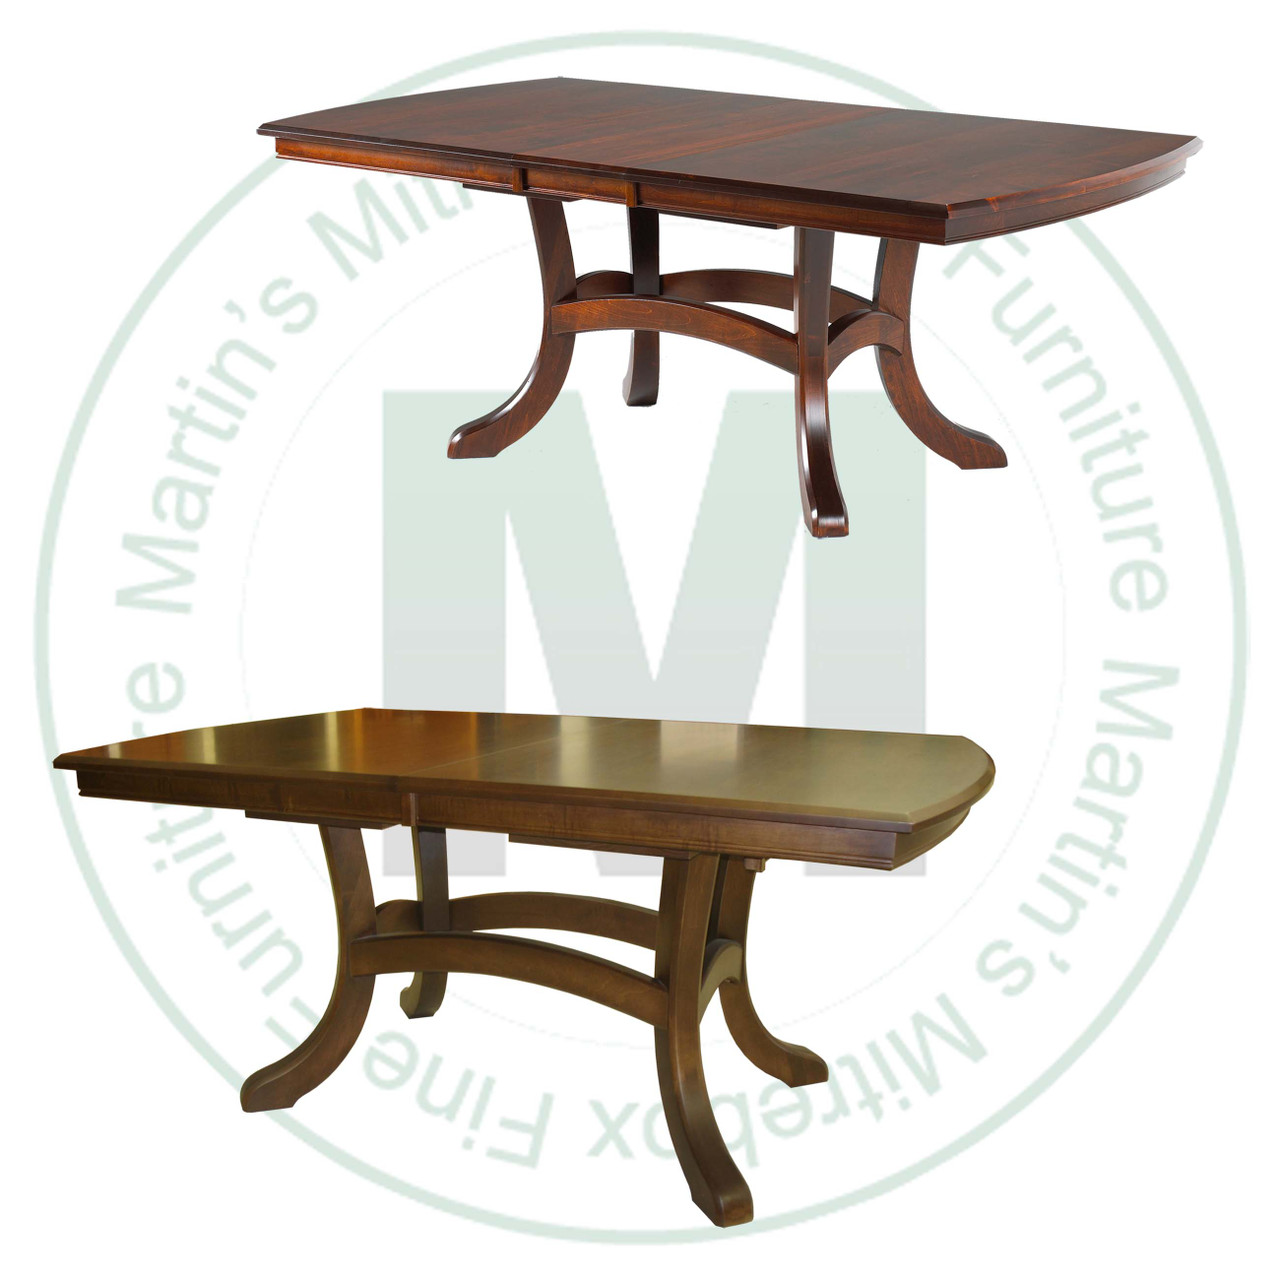 Maple Jordan Double Pedestal Table 54''D x 66''W x 30''H With 3 - 12'' Leaves. Table Has 1'' Thick Top